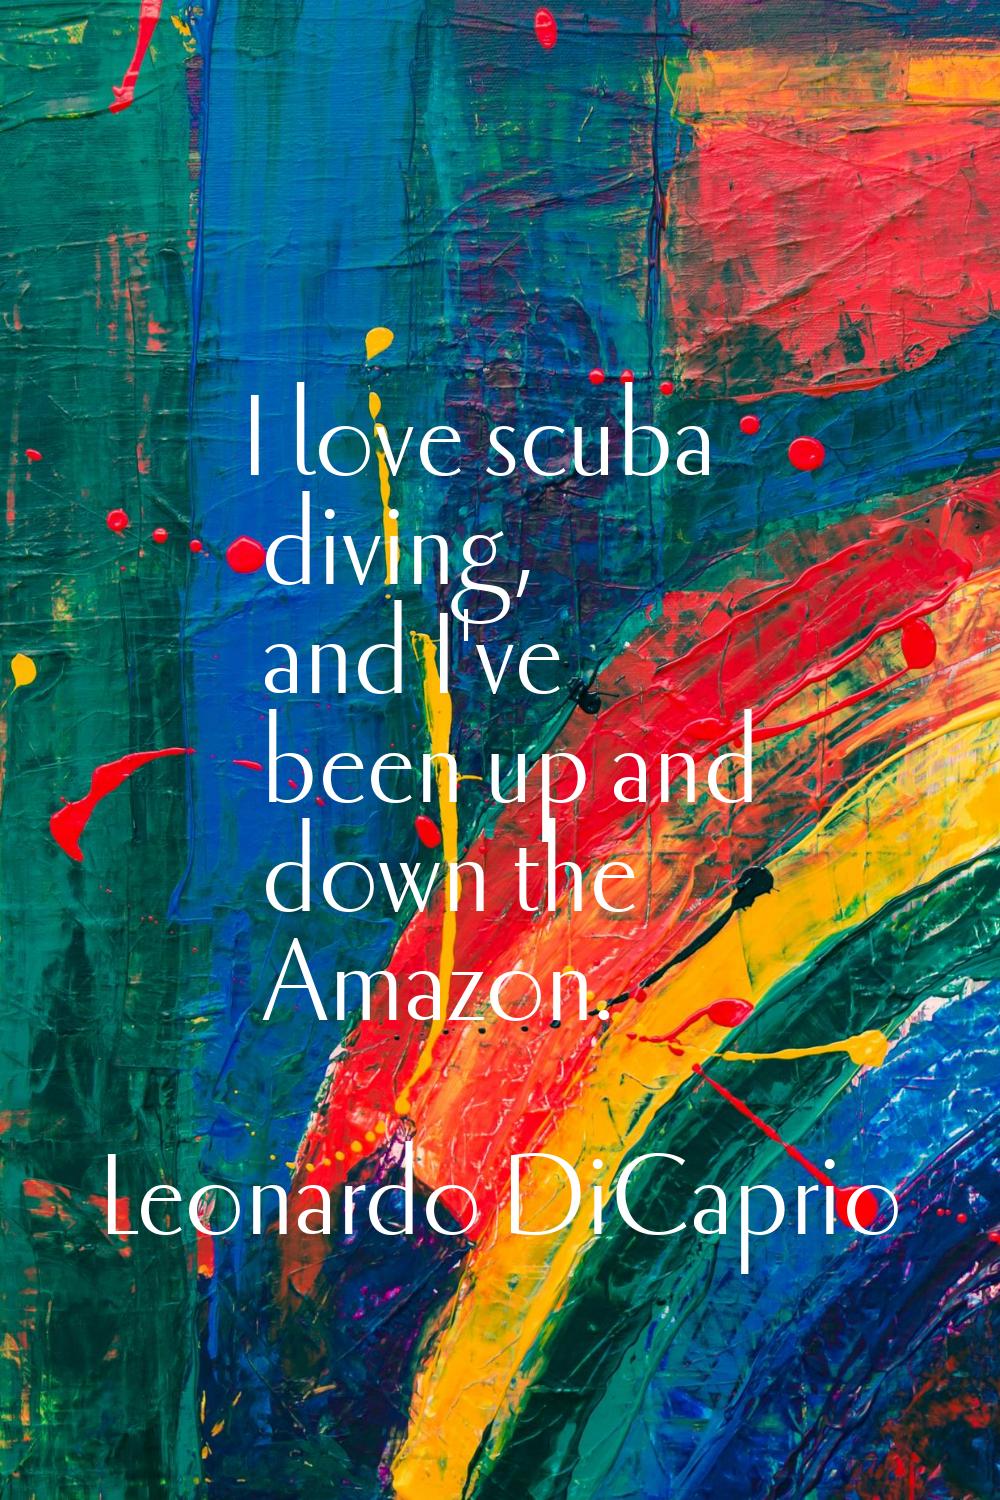 I love scuba diving, and I've been up and down the Amazon.